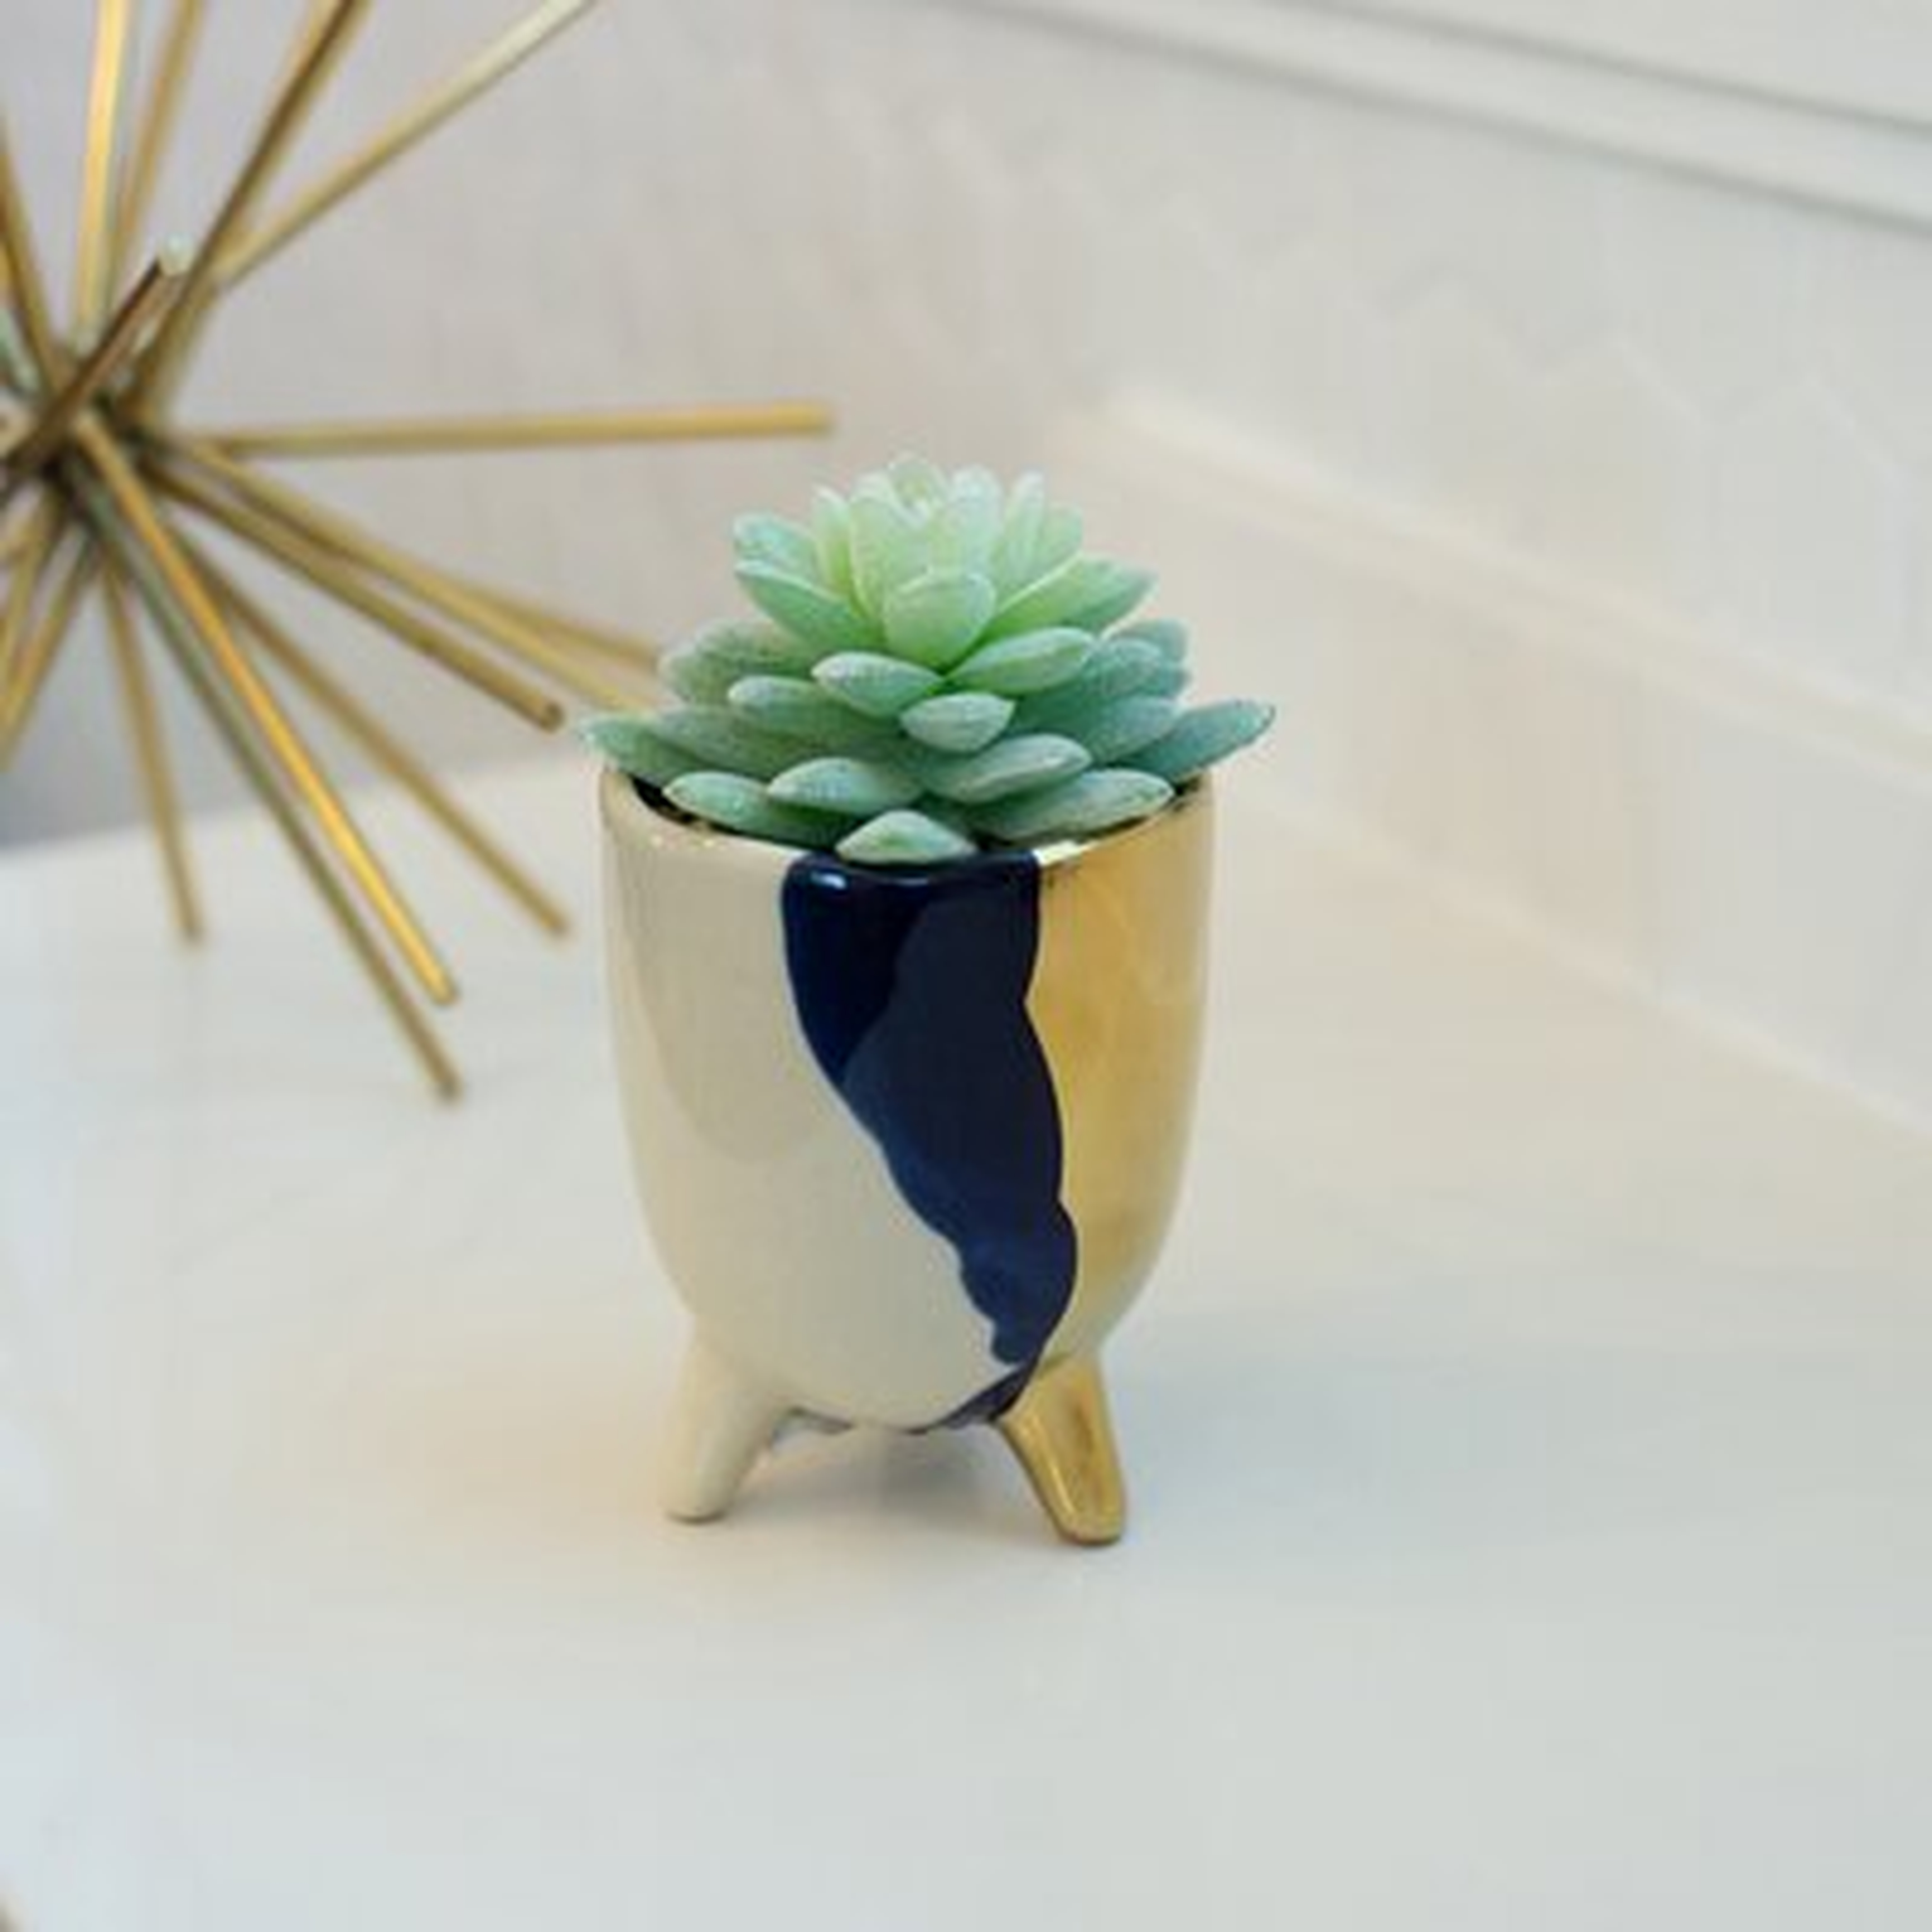 Tone Footed Ceramic Agave Succulent in Pot - Wayfair